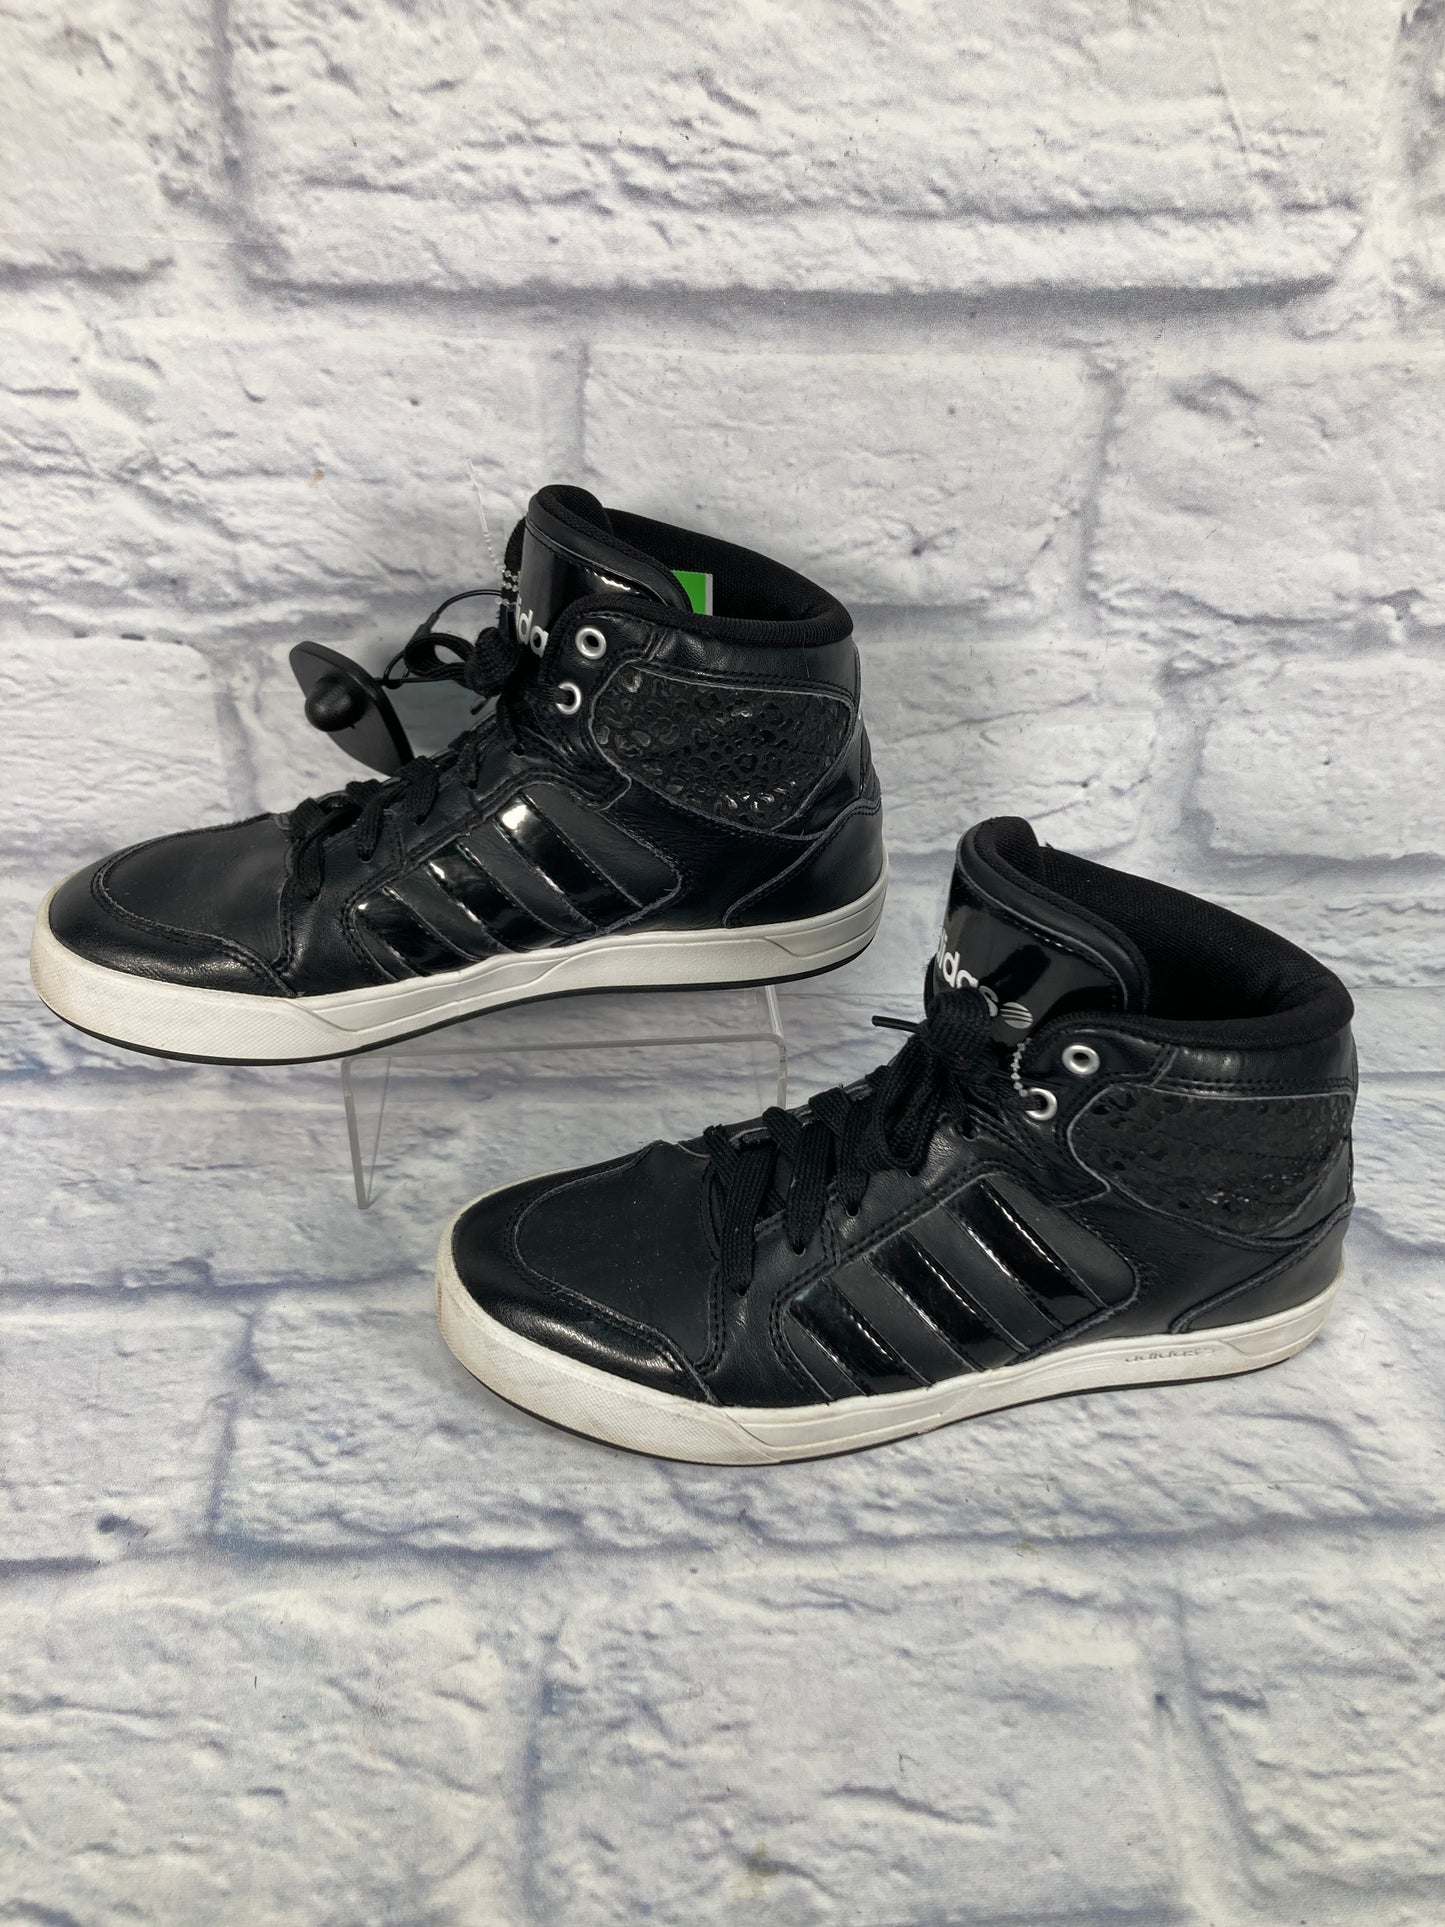 Shoes Sneakers By Adidas  Size: 8